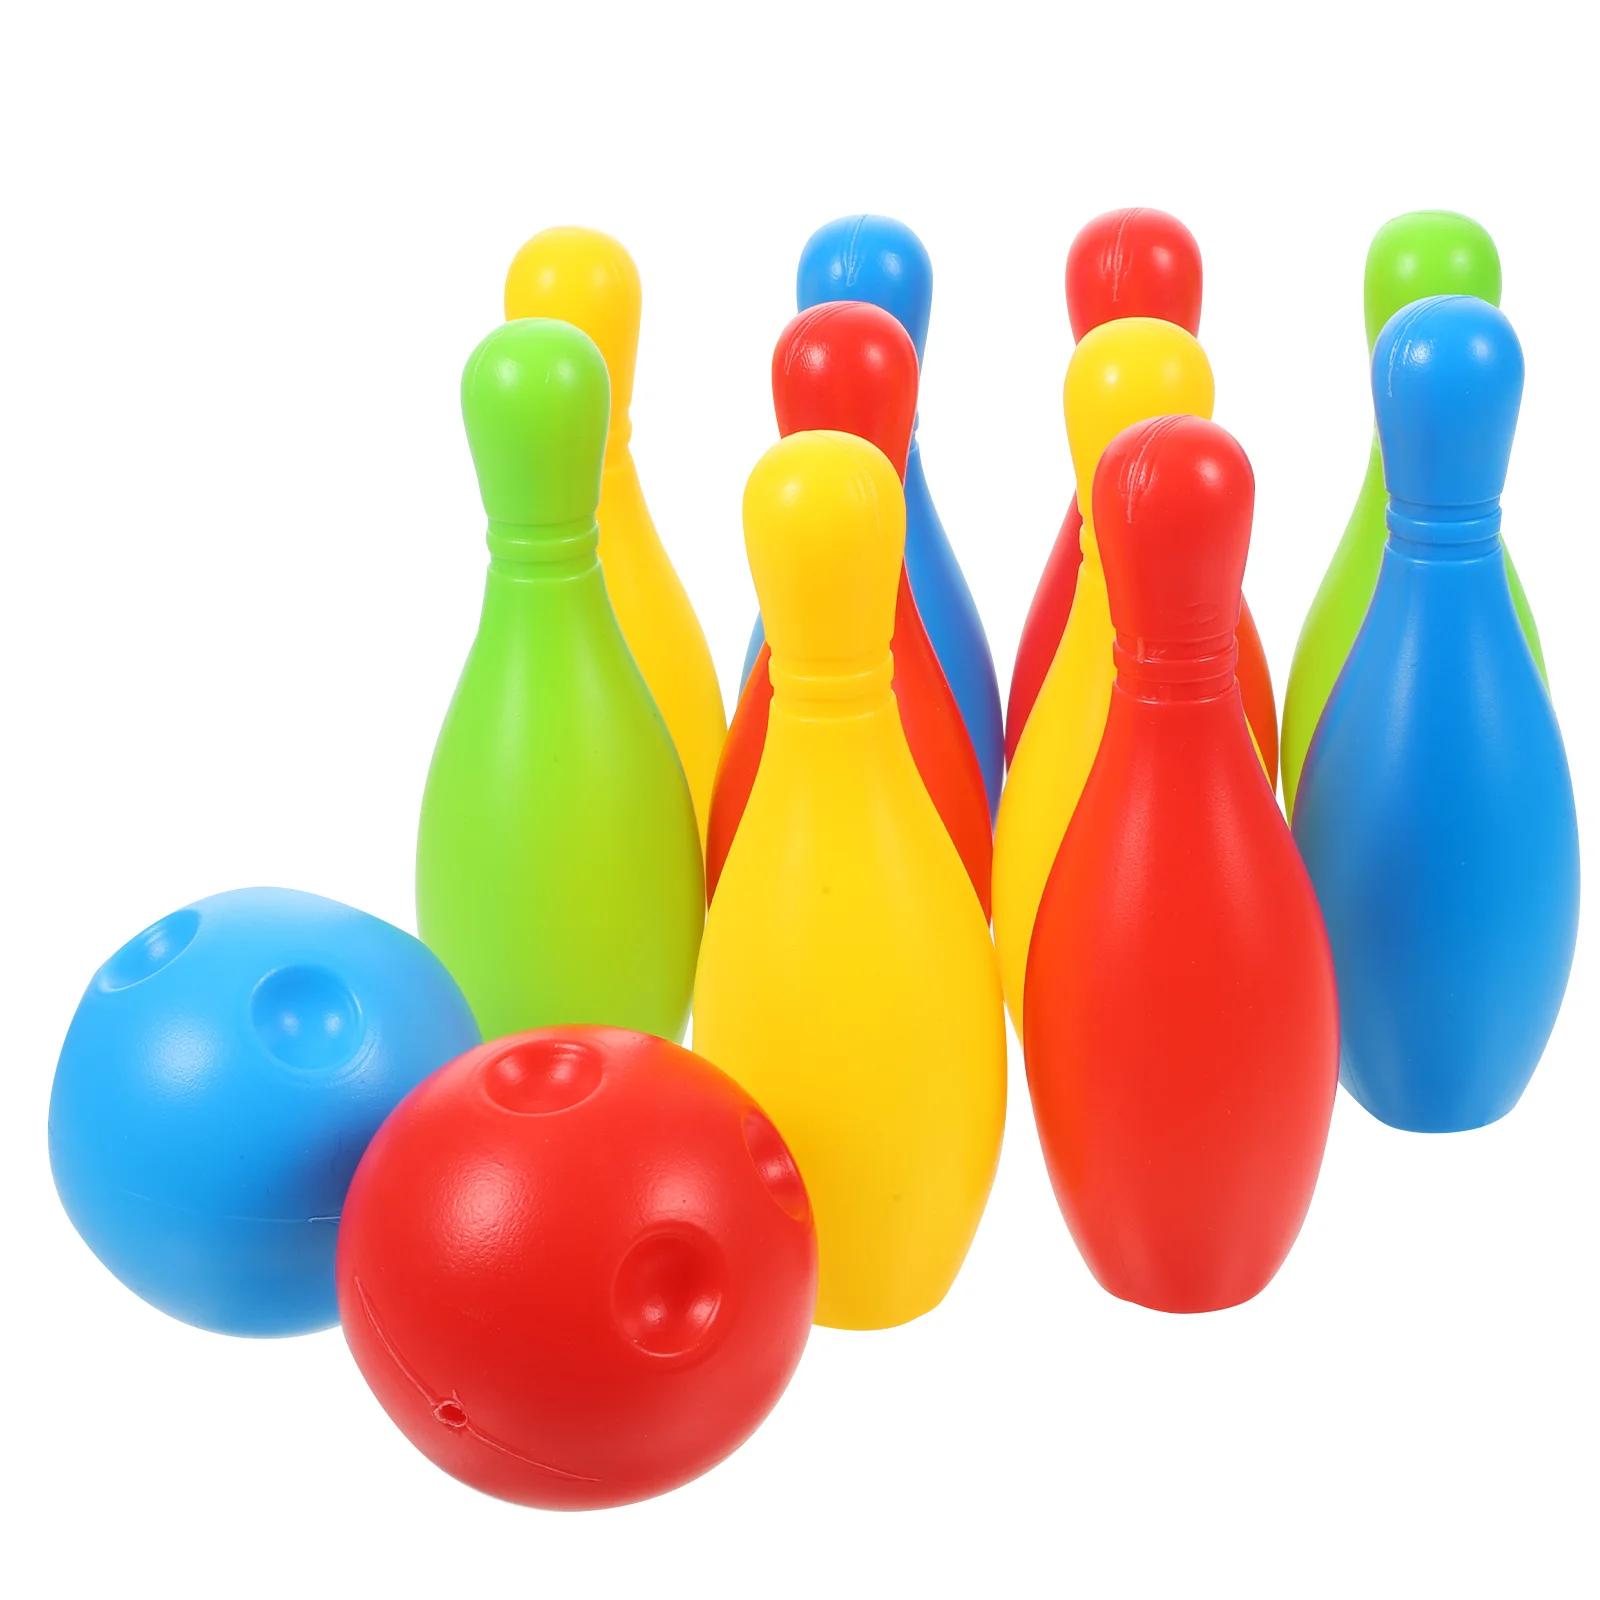 Kids Bowling Set Includes 10 Classical Colorful and 2 Balls